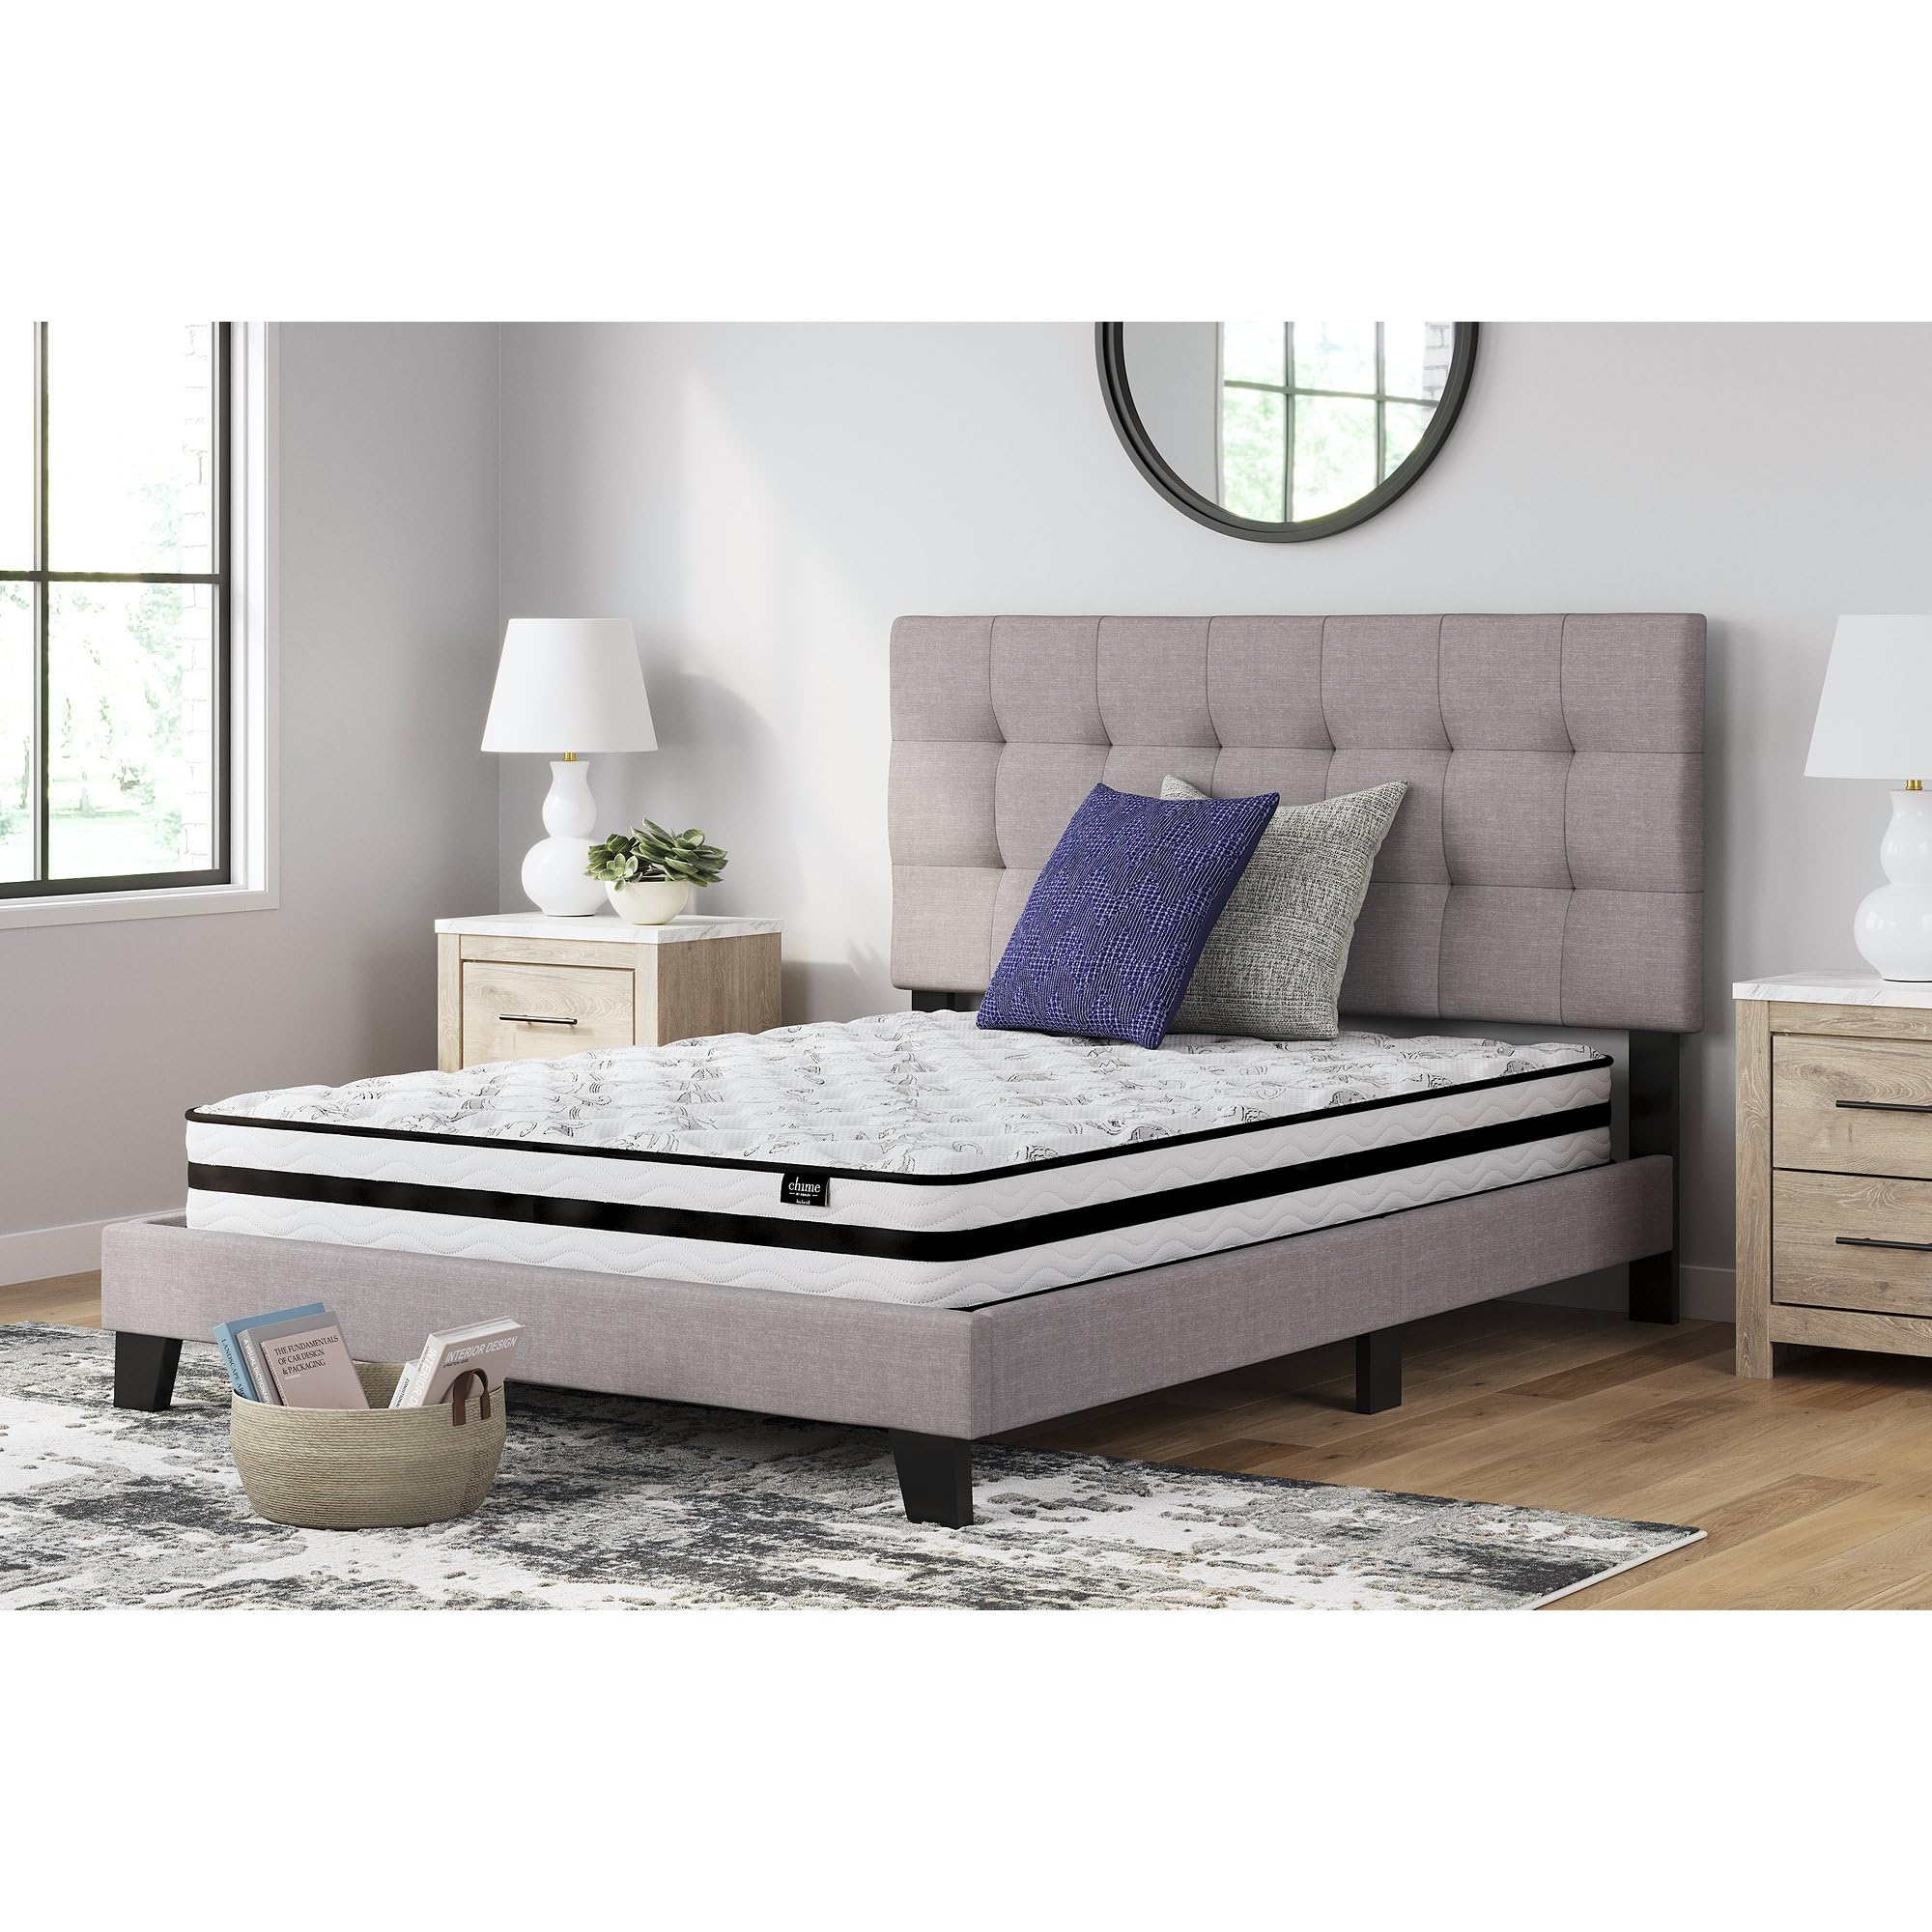 Signature Design by Ashley Chime 8 Inch Firm Hybrid Mattress, CertiPUR-US Certified Foam